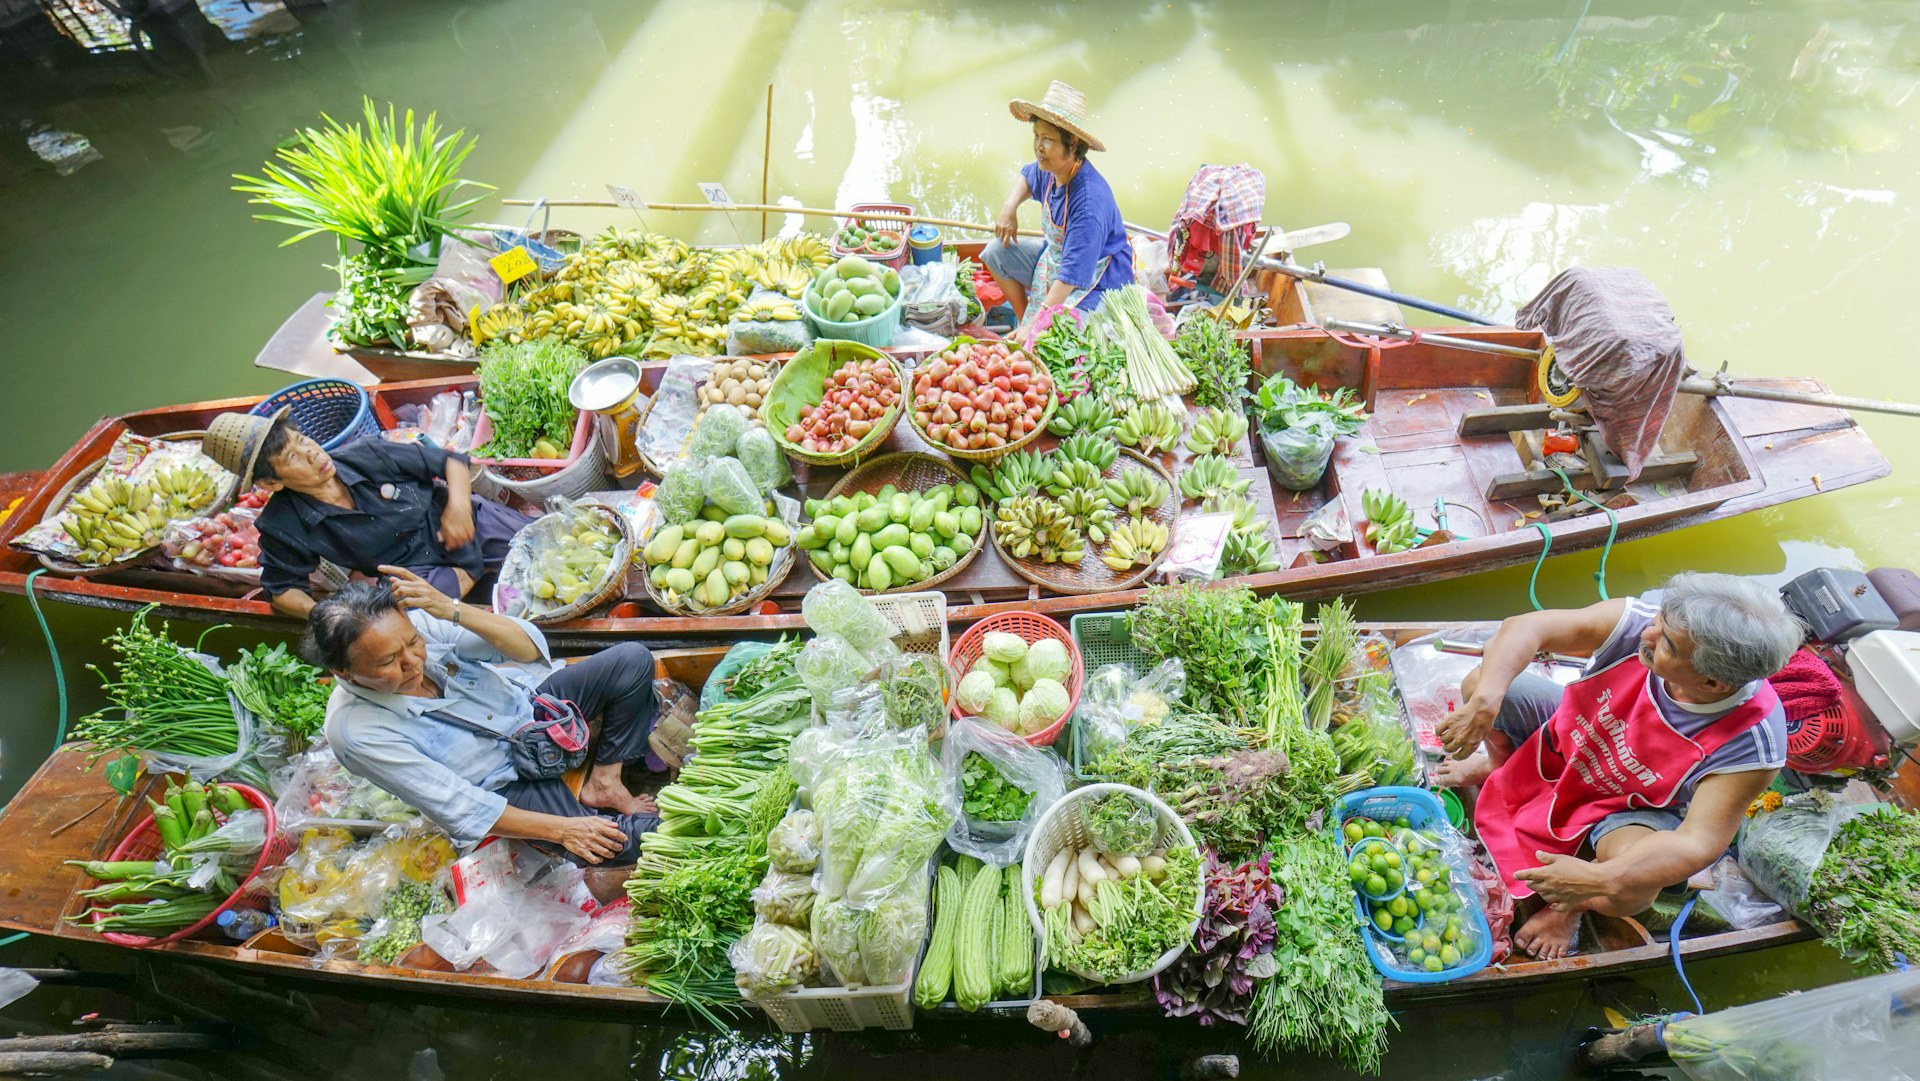 Floating market traders with fruits and vegetables packed into small boats in a Bangkok canal, Taling Chan 